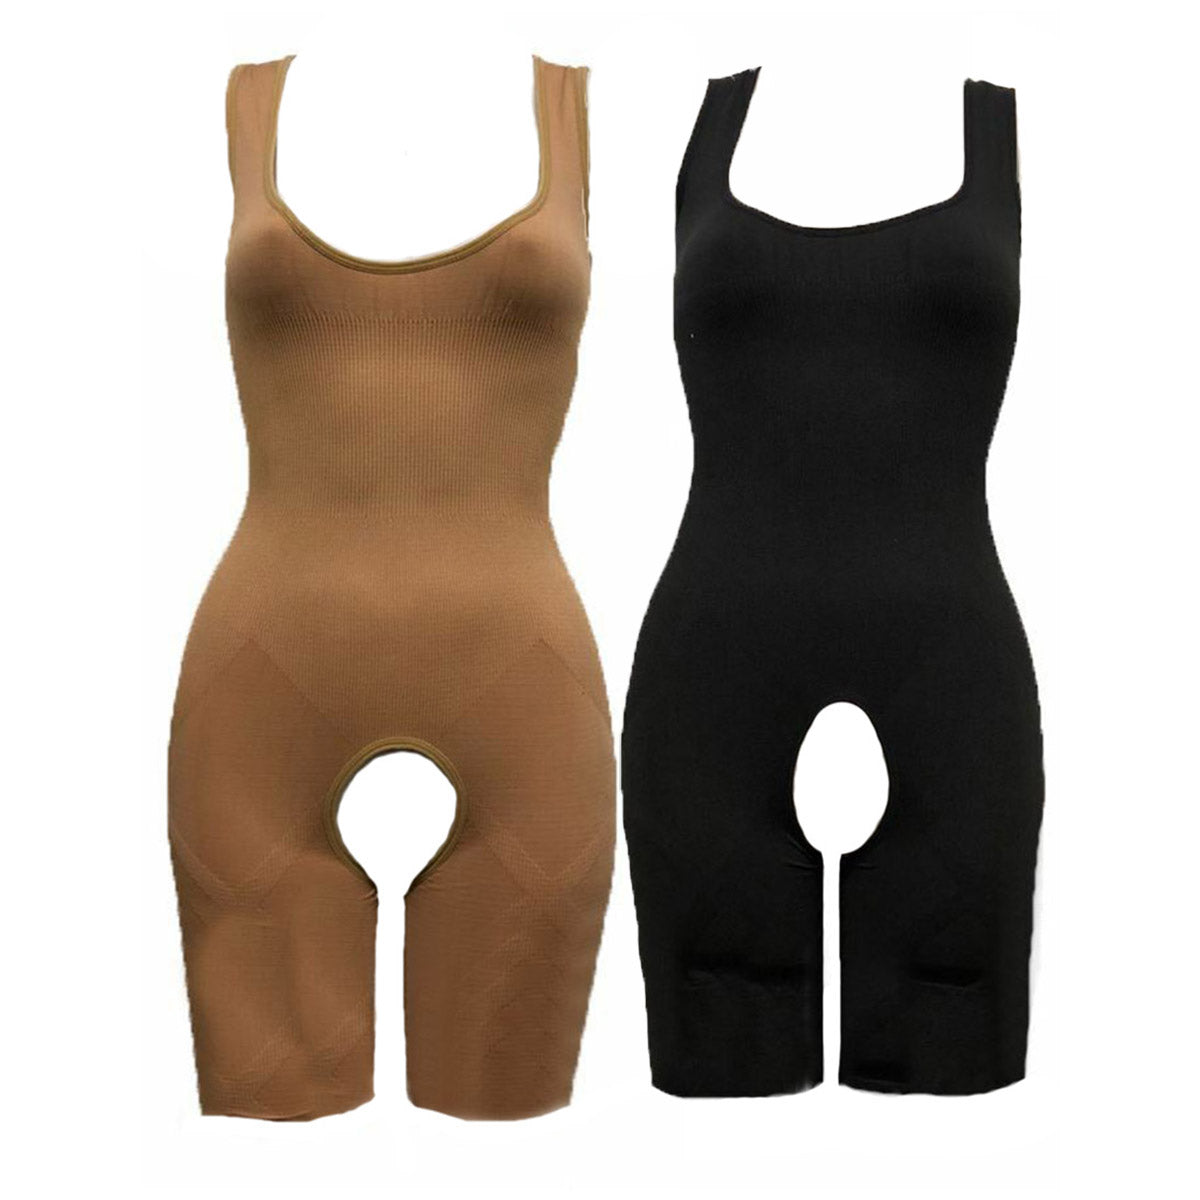 Elasticated all in one crotchless bodysuit shaper underwear